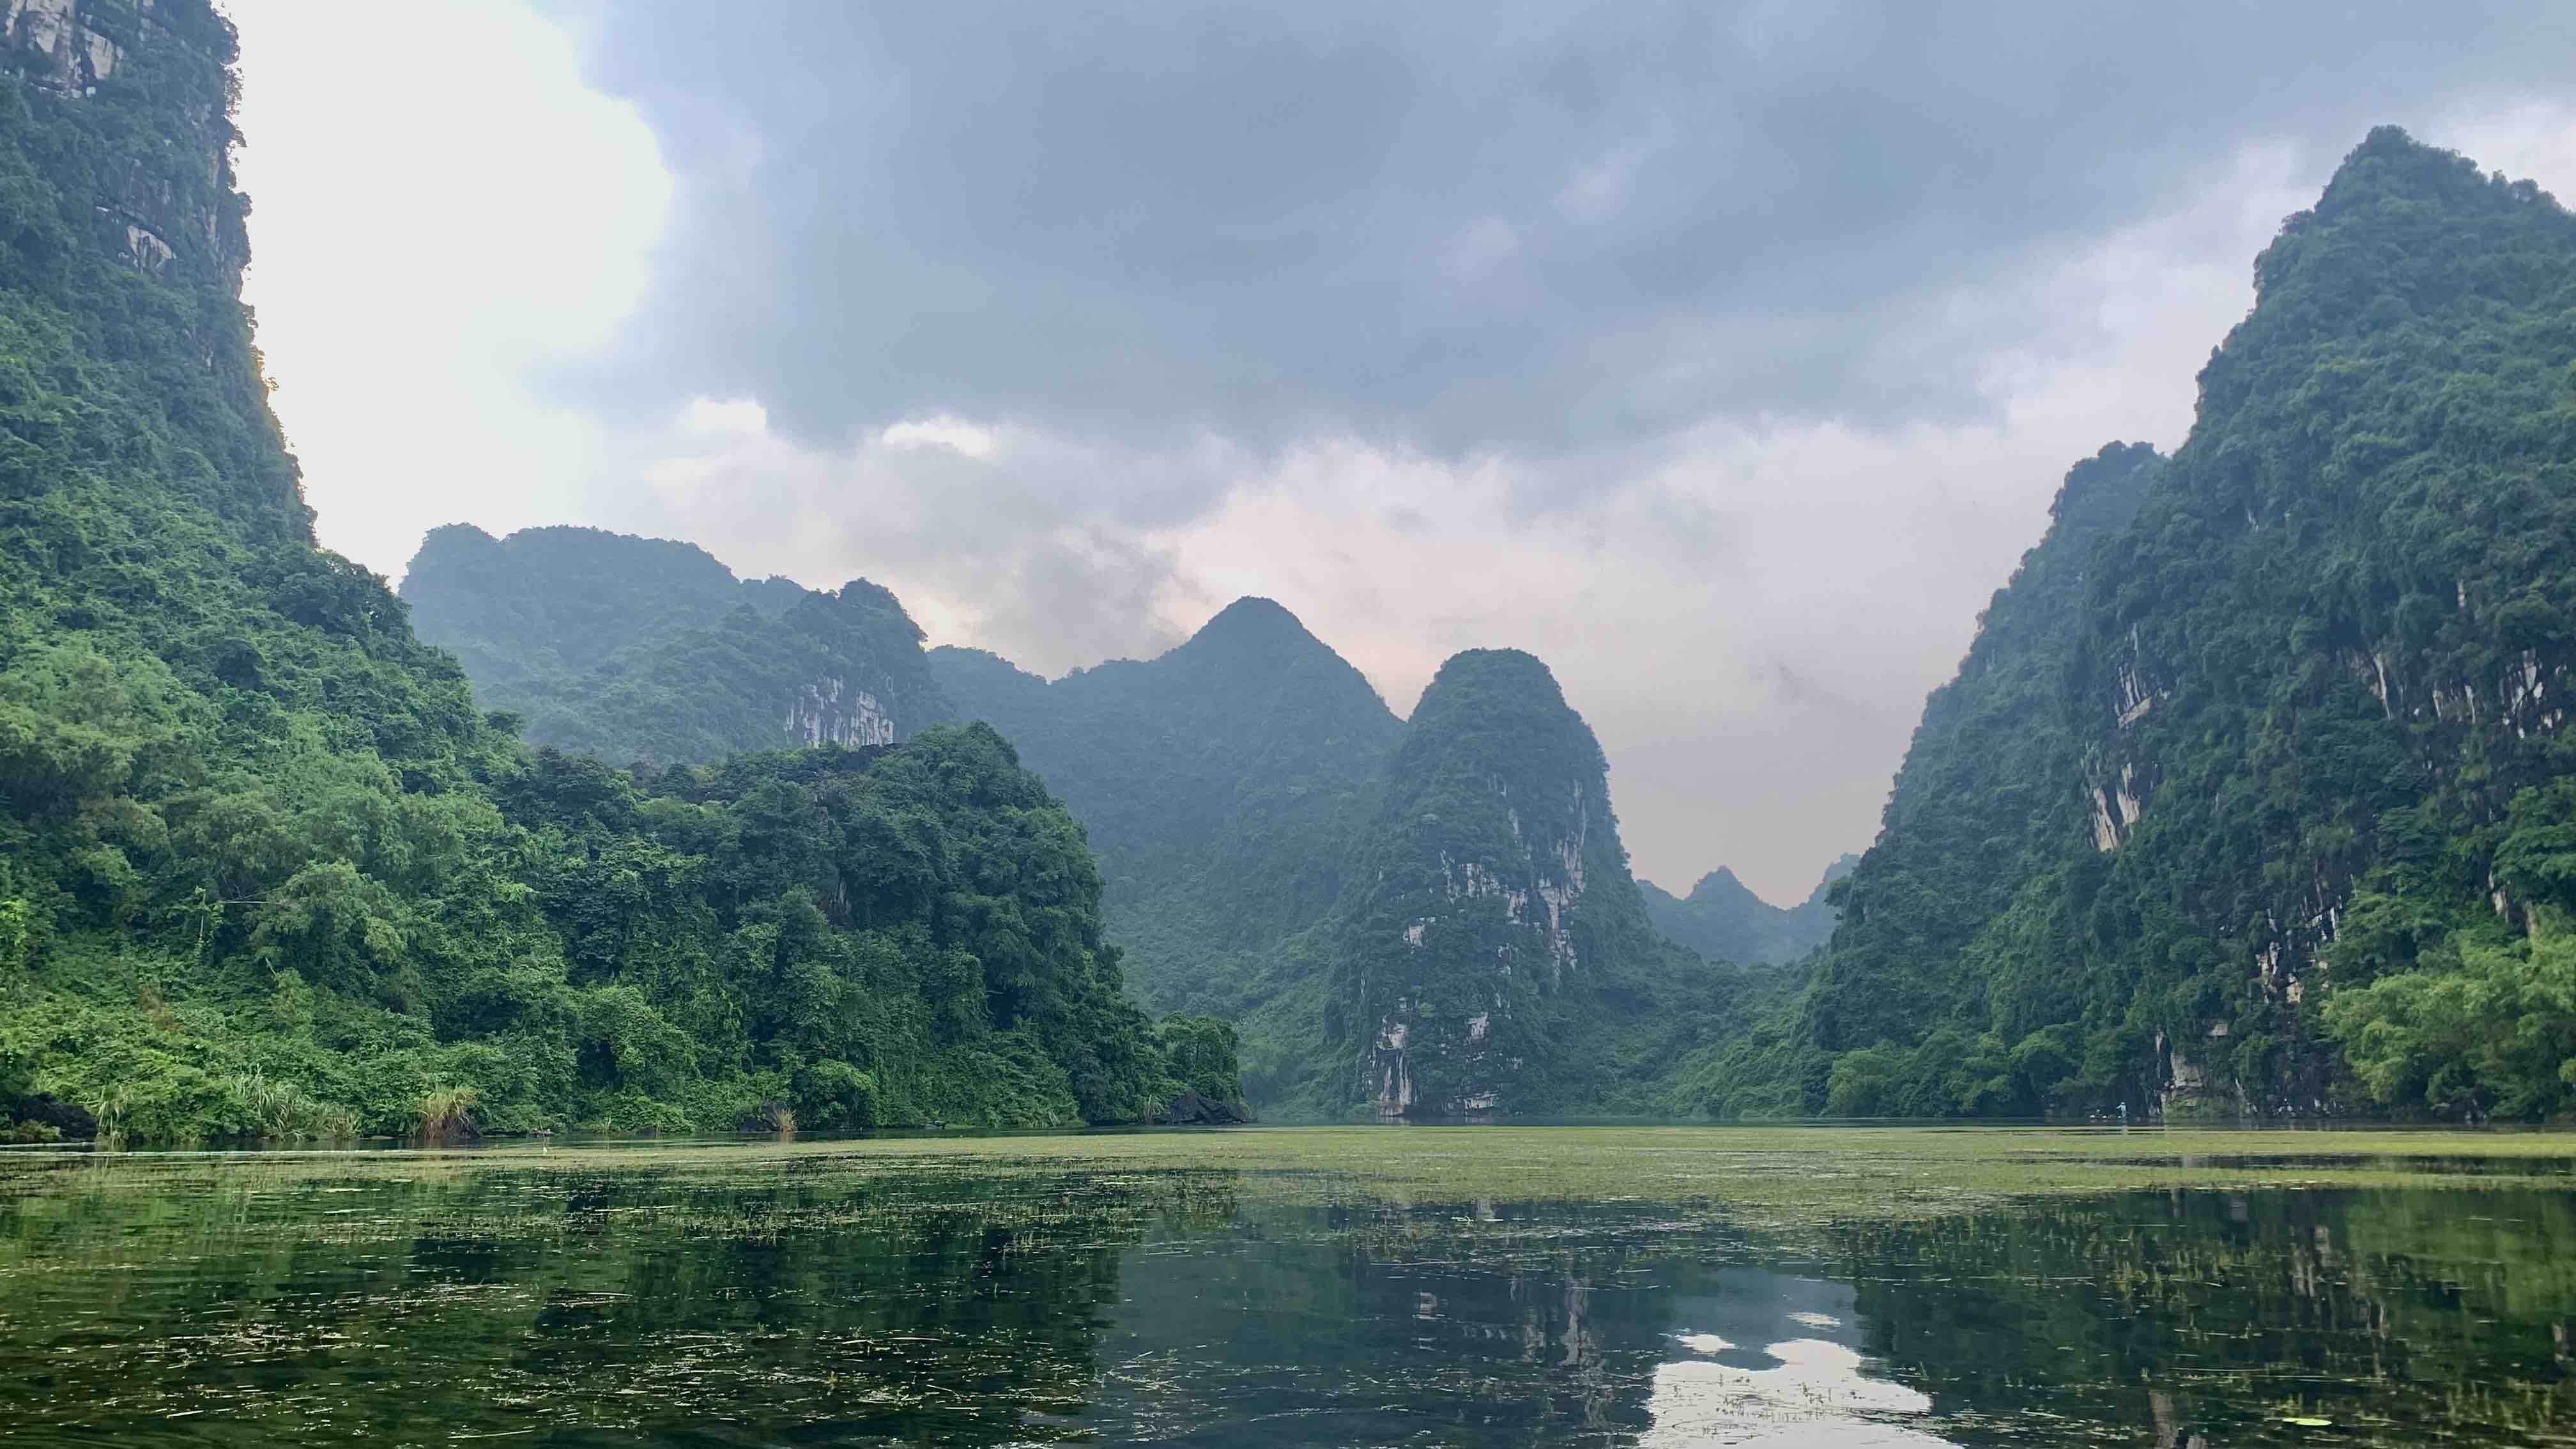 River, mountains, and sky create a poetic natural landscape at Trang An Complex, Ninh Binh Province, Vietnam. Photo: Linh To / Tuoi Tre News